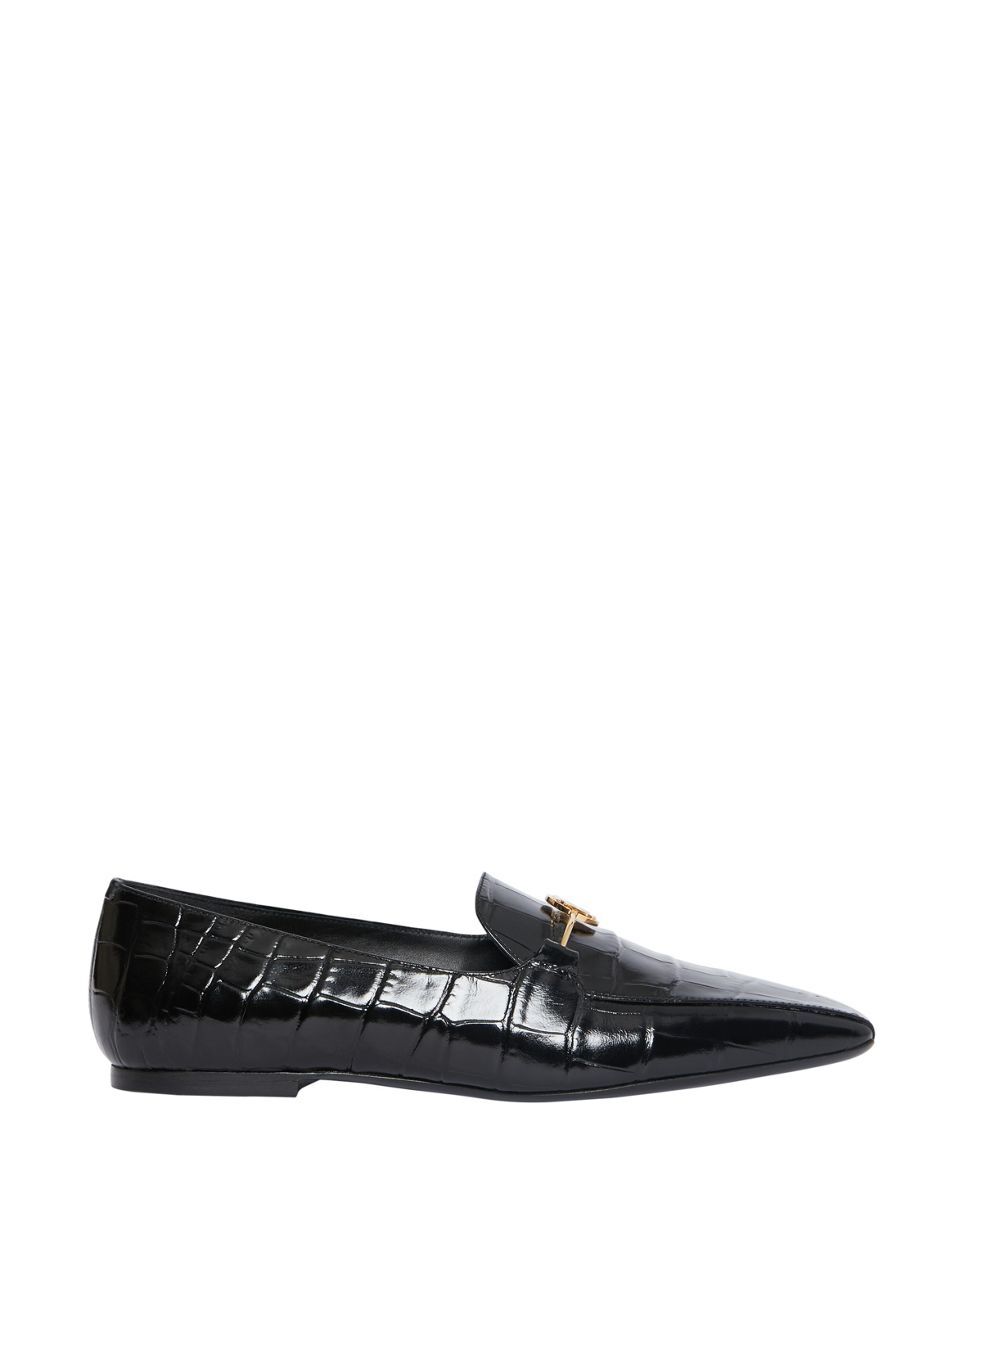 black leather loafers womens sale